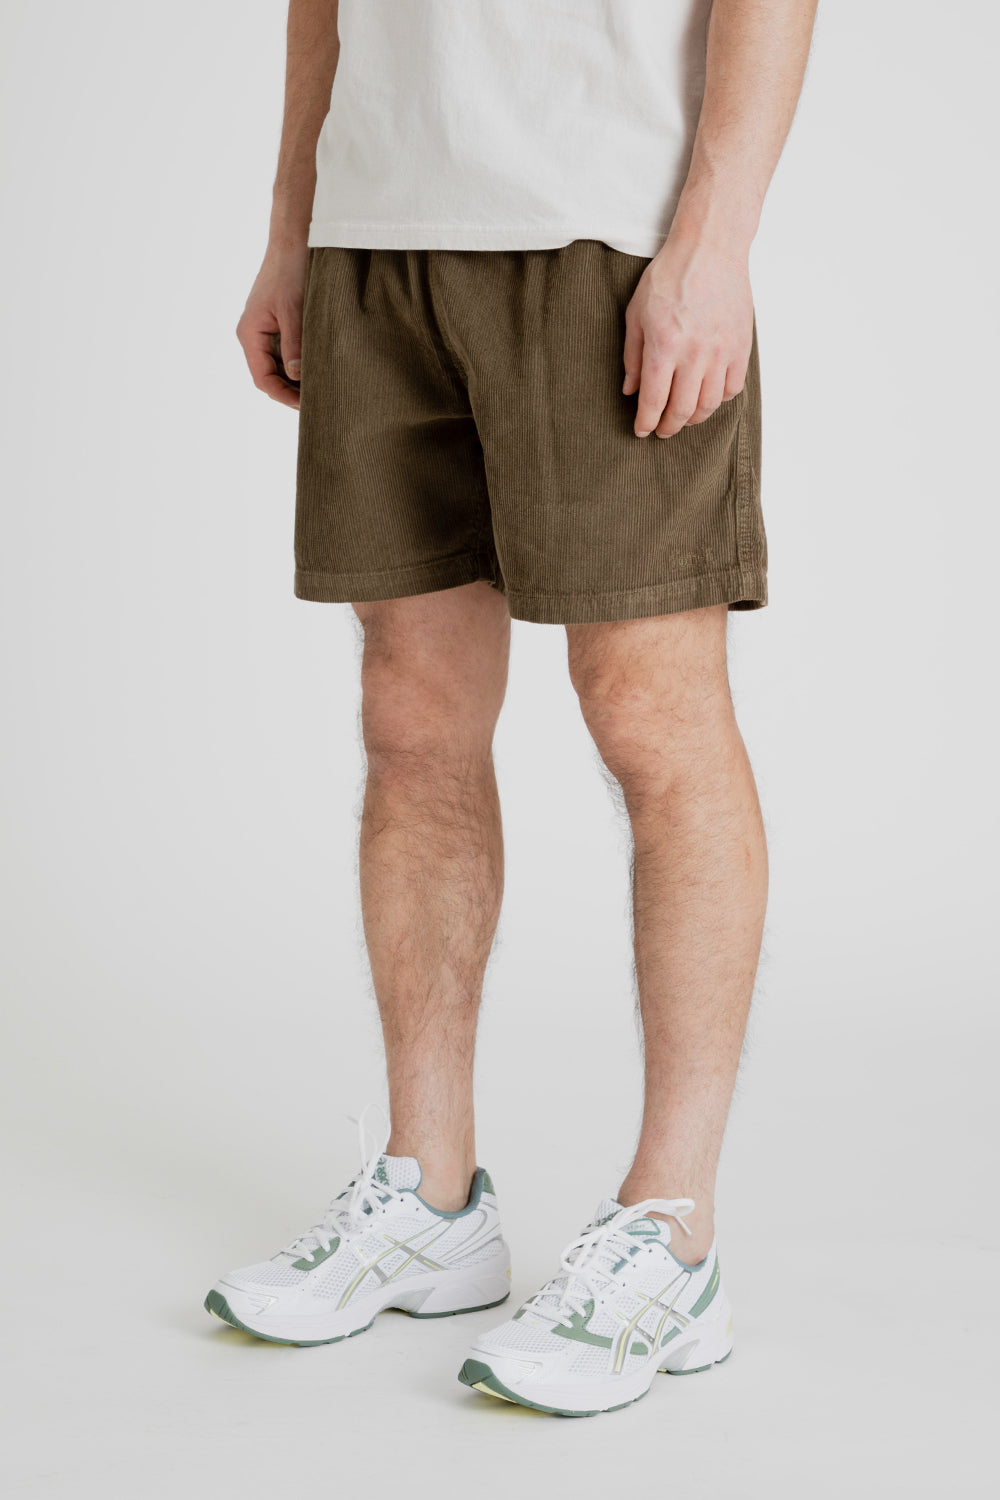 Foret Dose Corduroy Shorts in Army